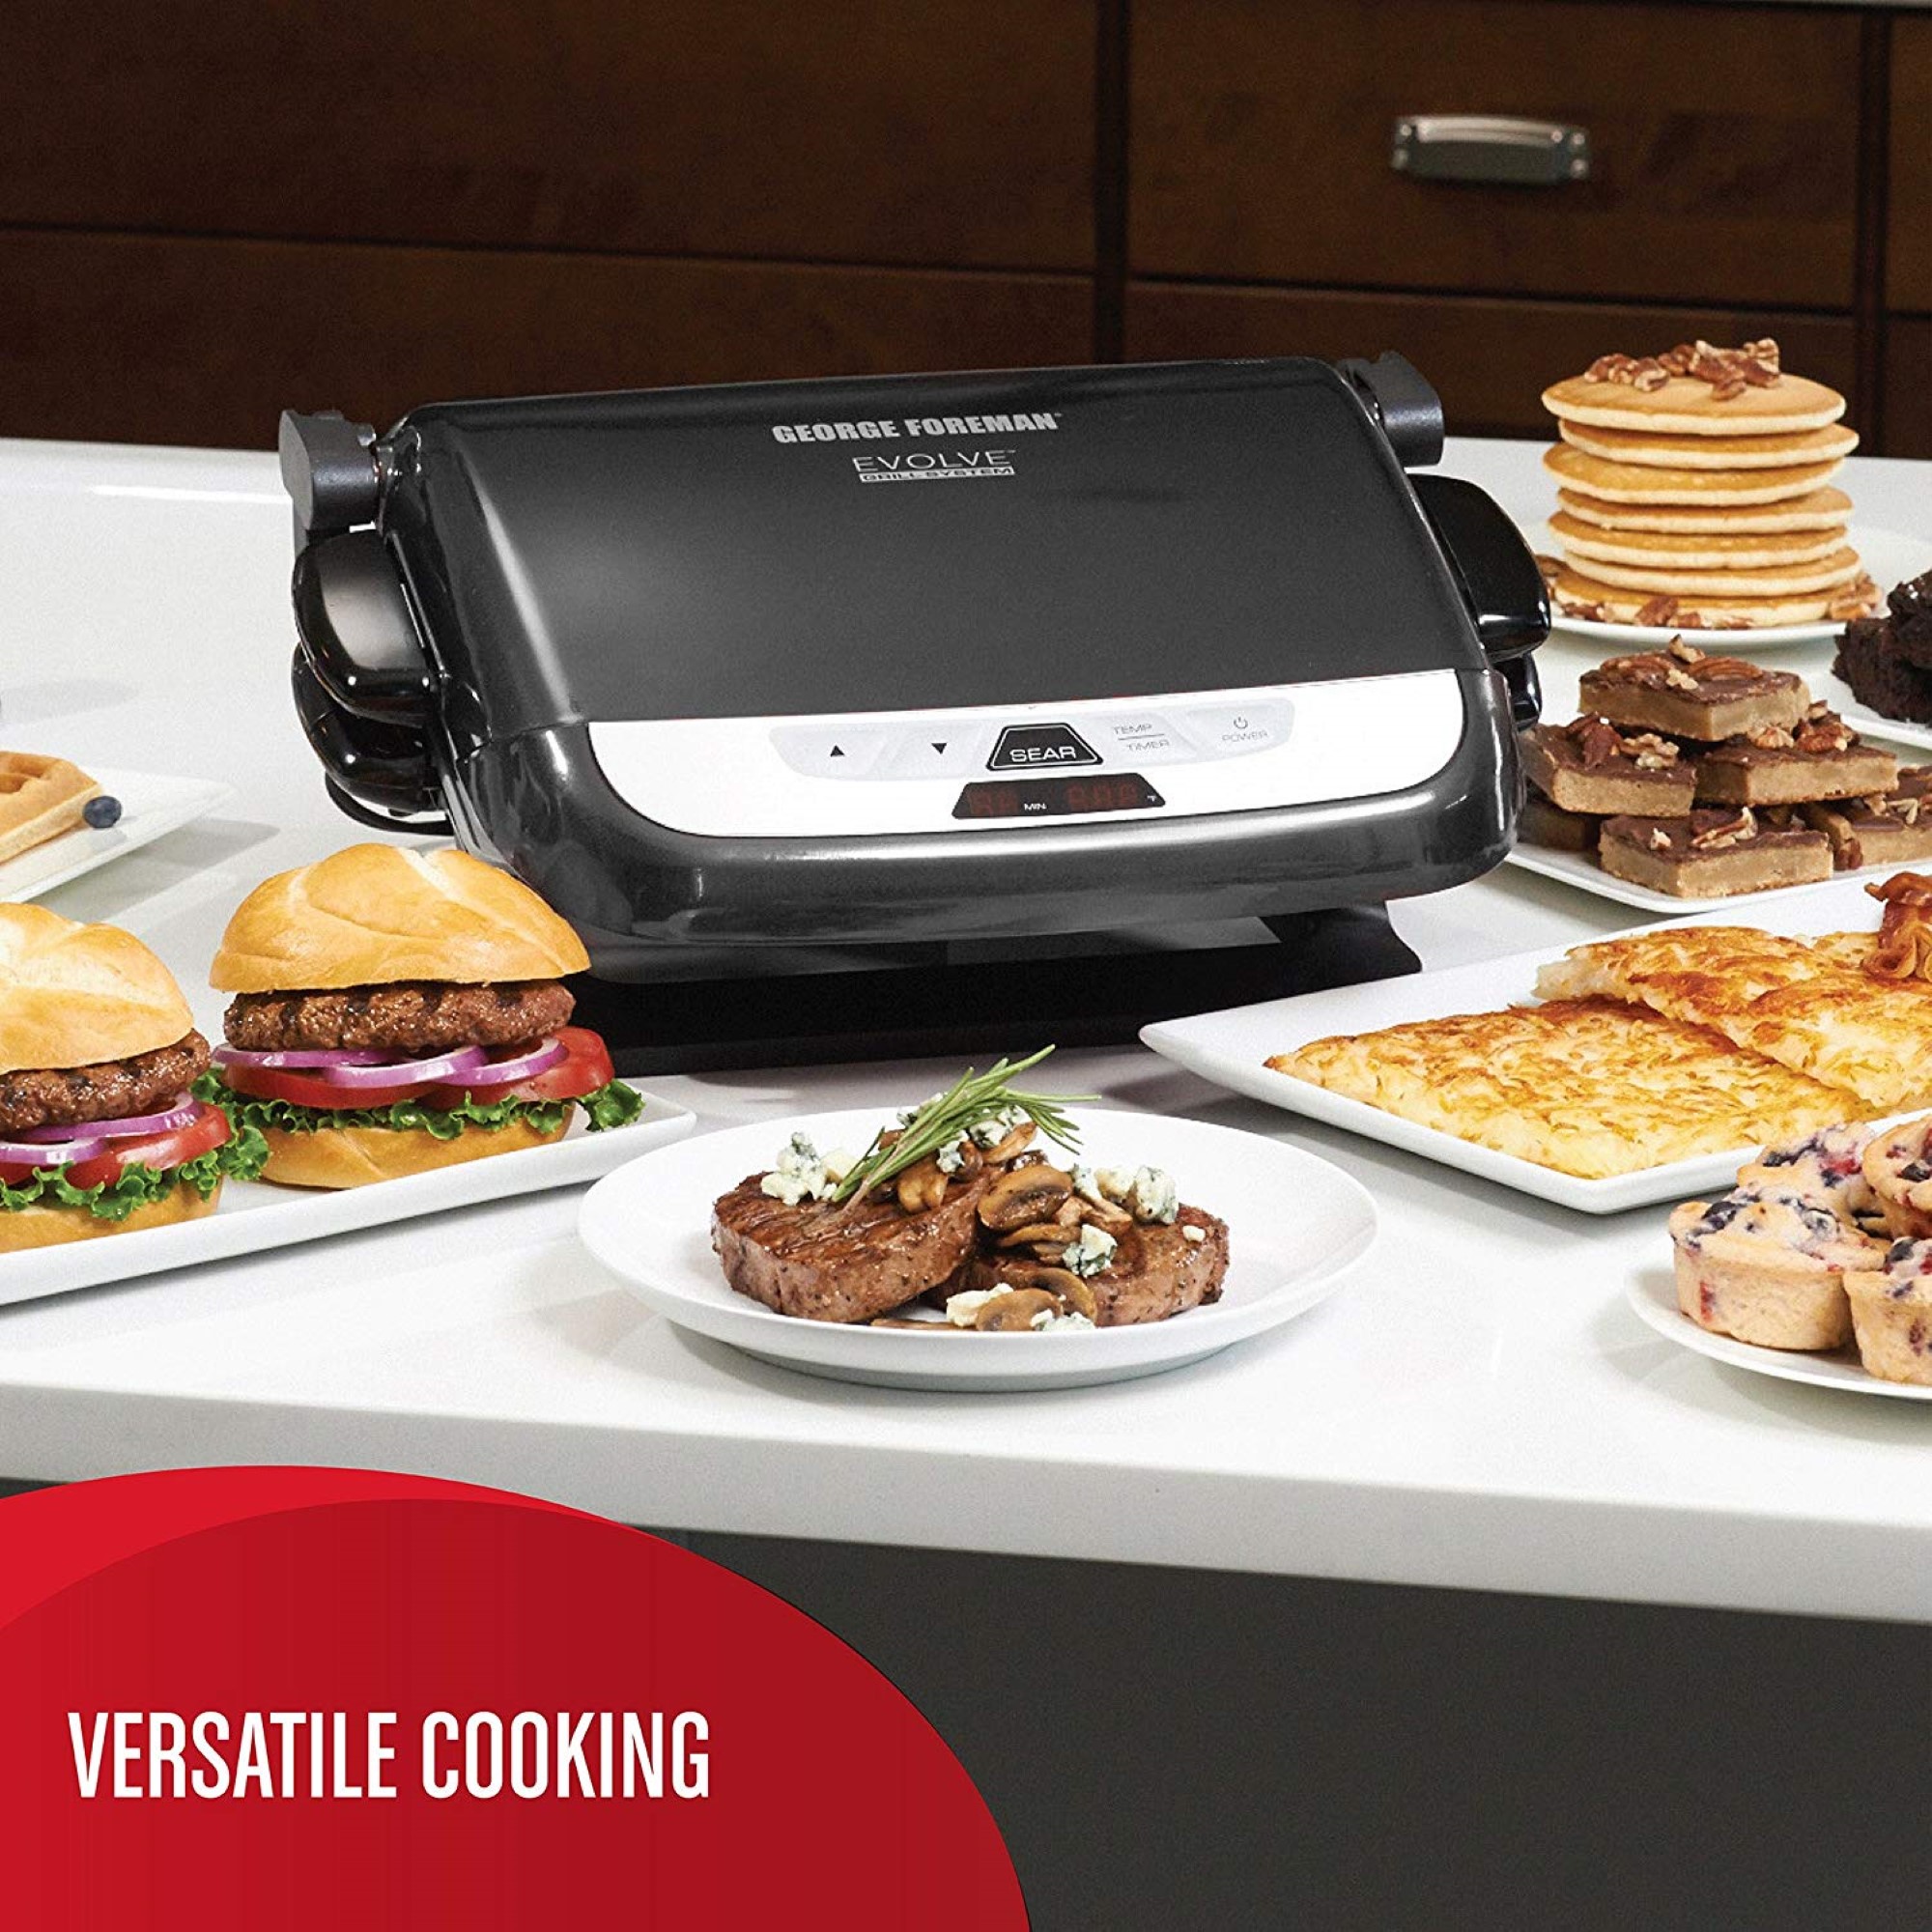 George Foreman 5-Serving Evolve Grill With Waffle Plates And Ceramic Grill Plates Black - image 3 of 5